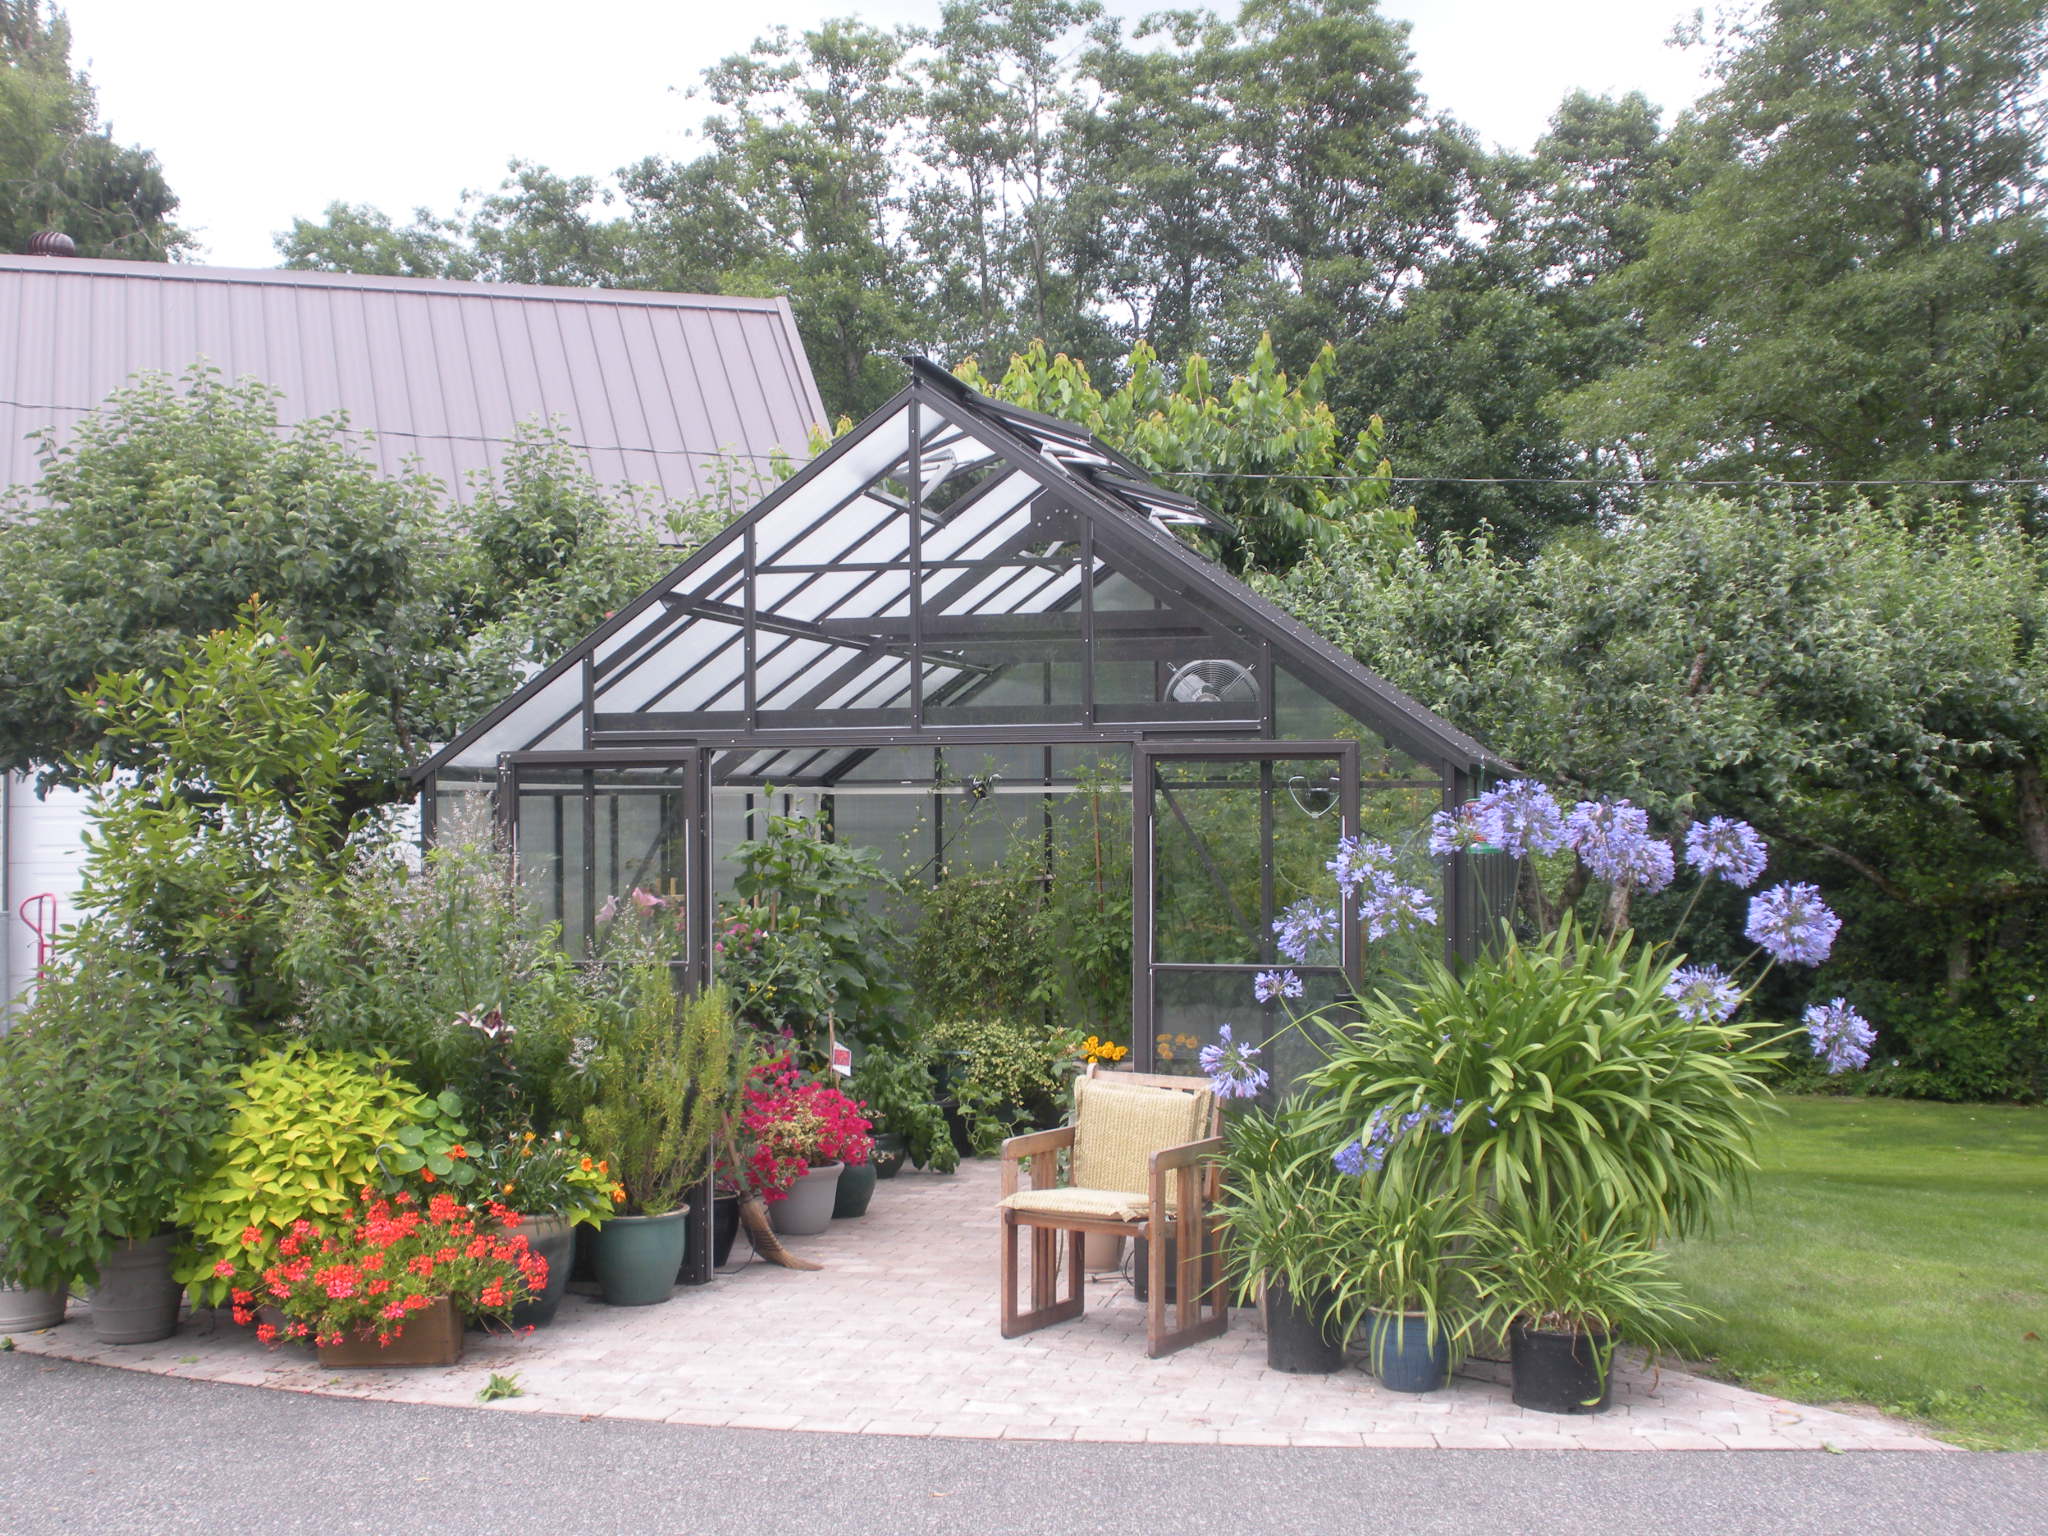 Traditional greenhouse